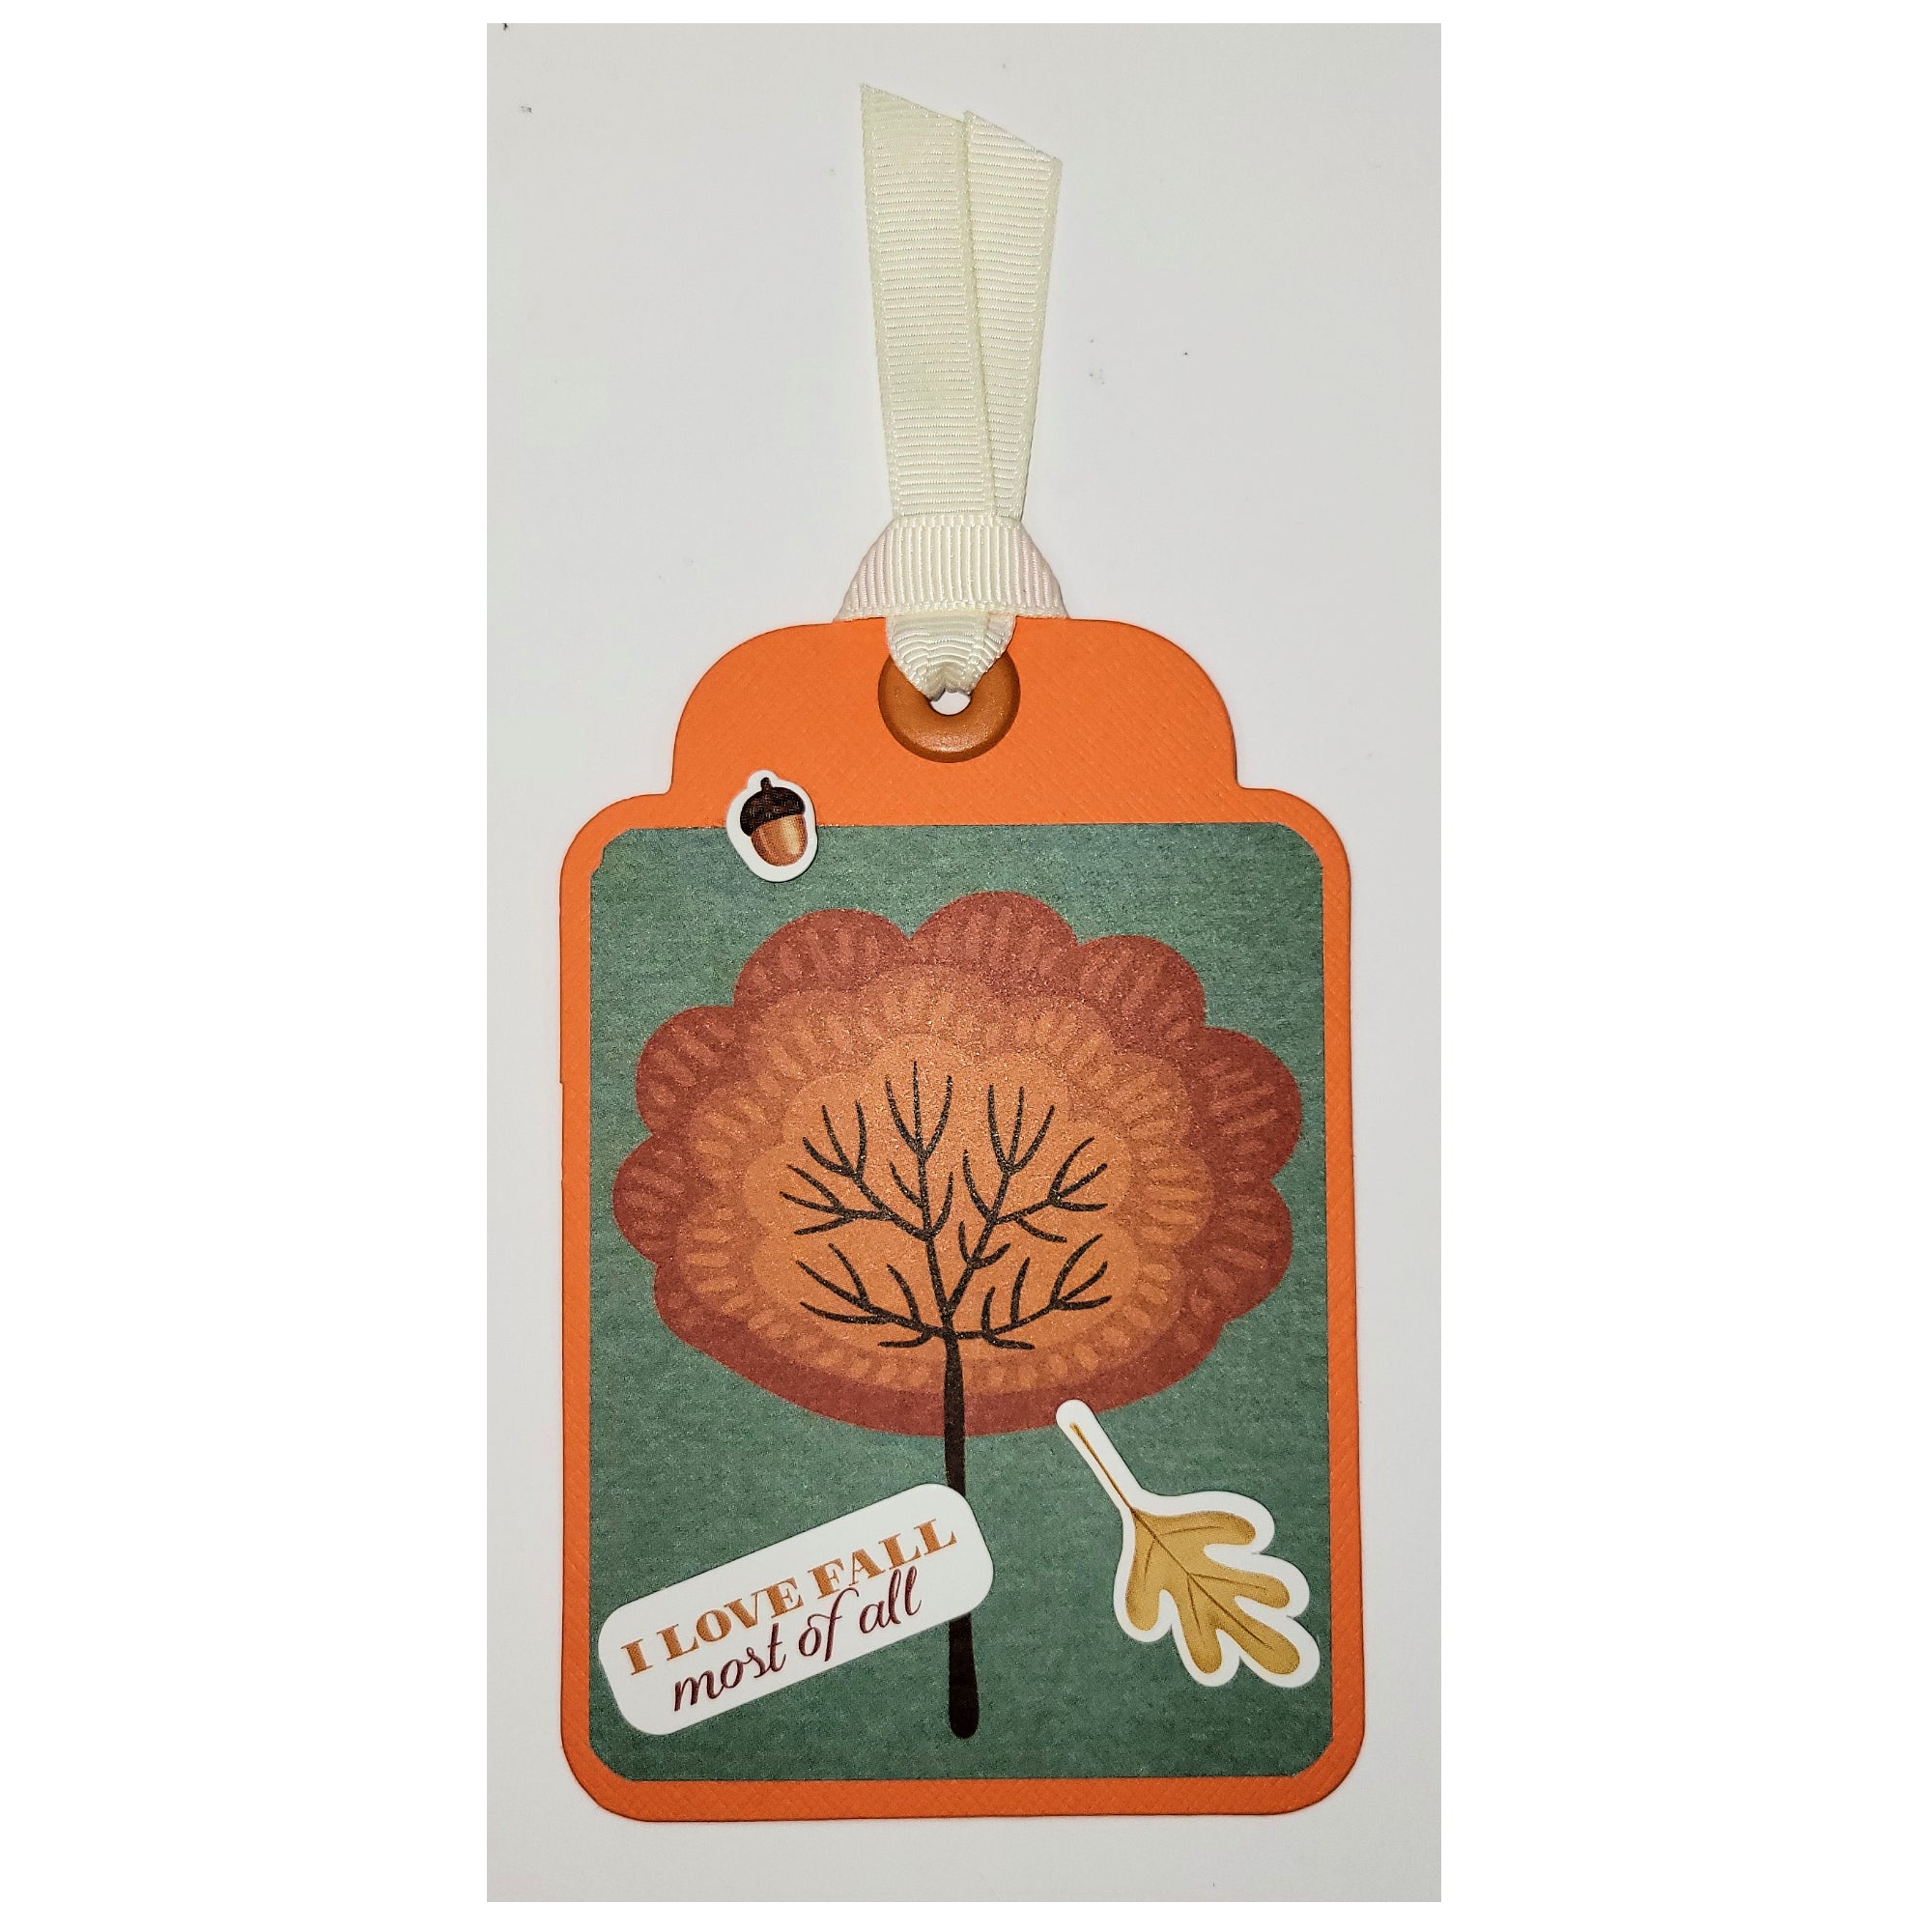 I Love Fall Most Of All 3 x 5 Coordinating Scrapbook Tag Embellishment by SSC Designs